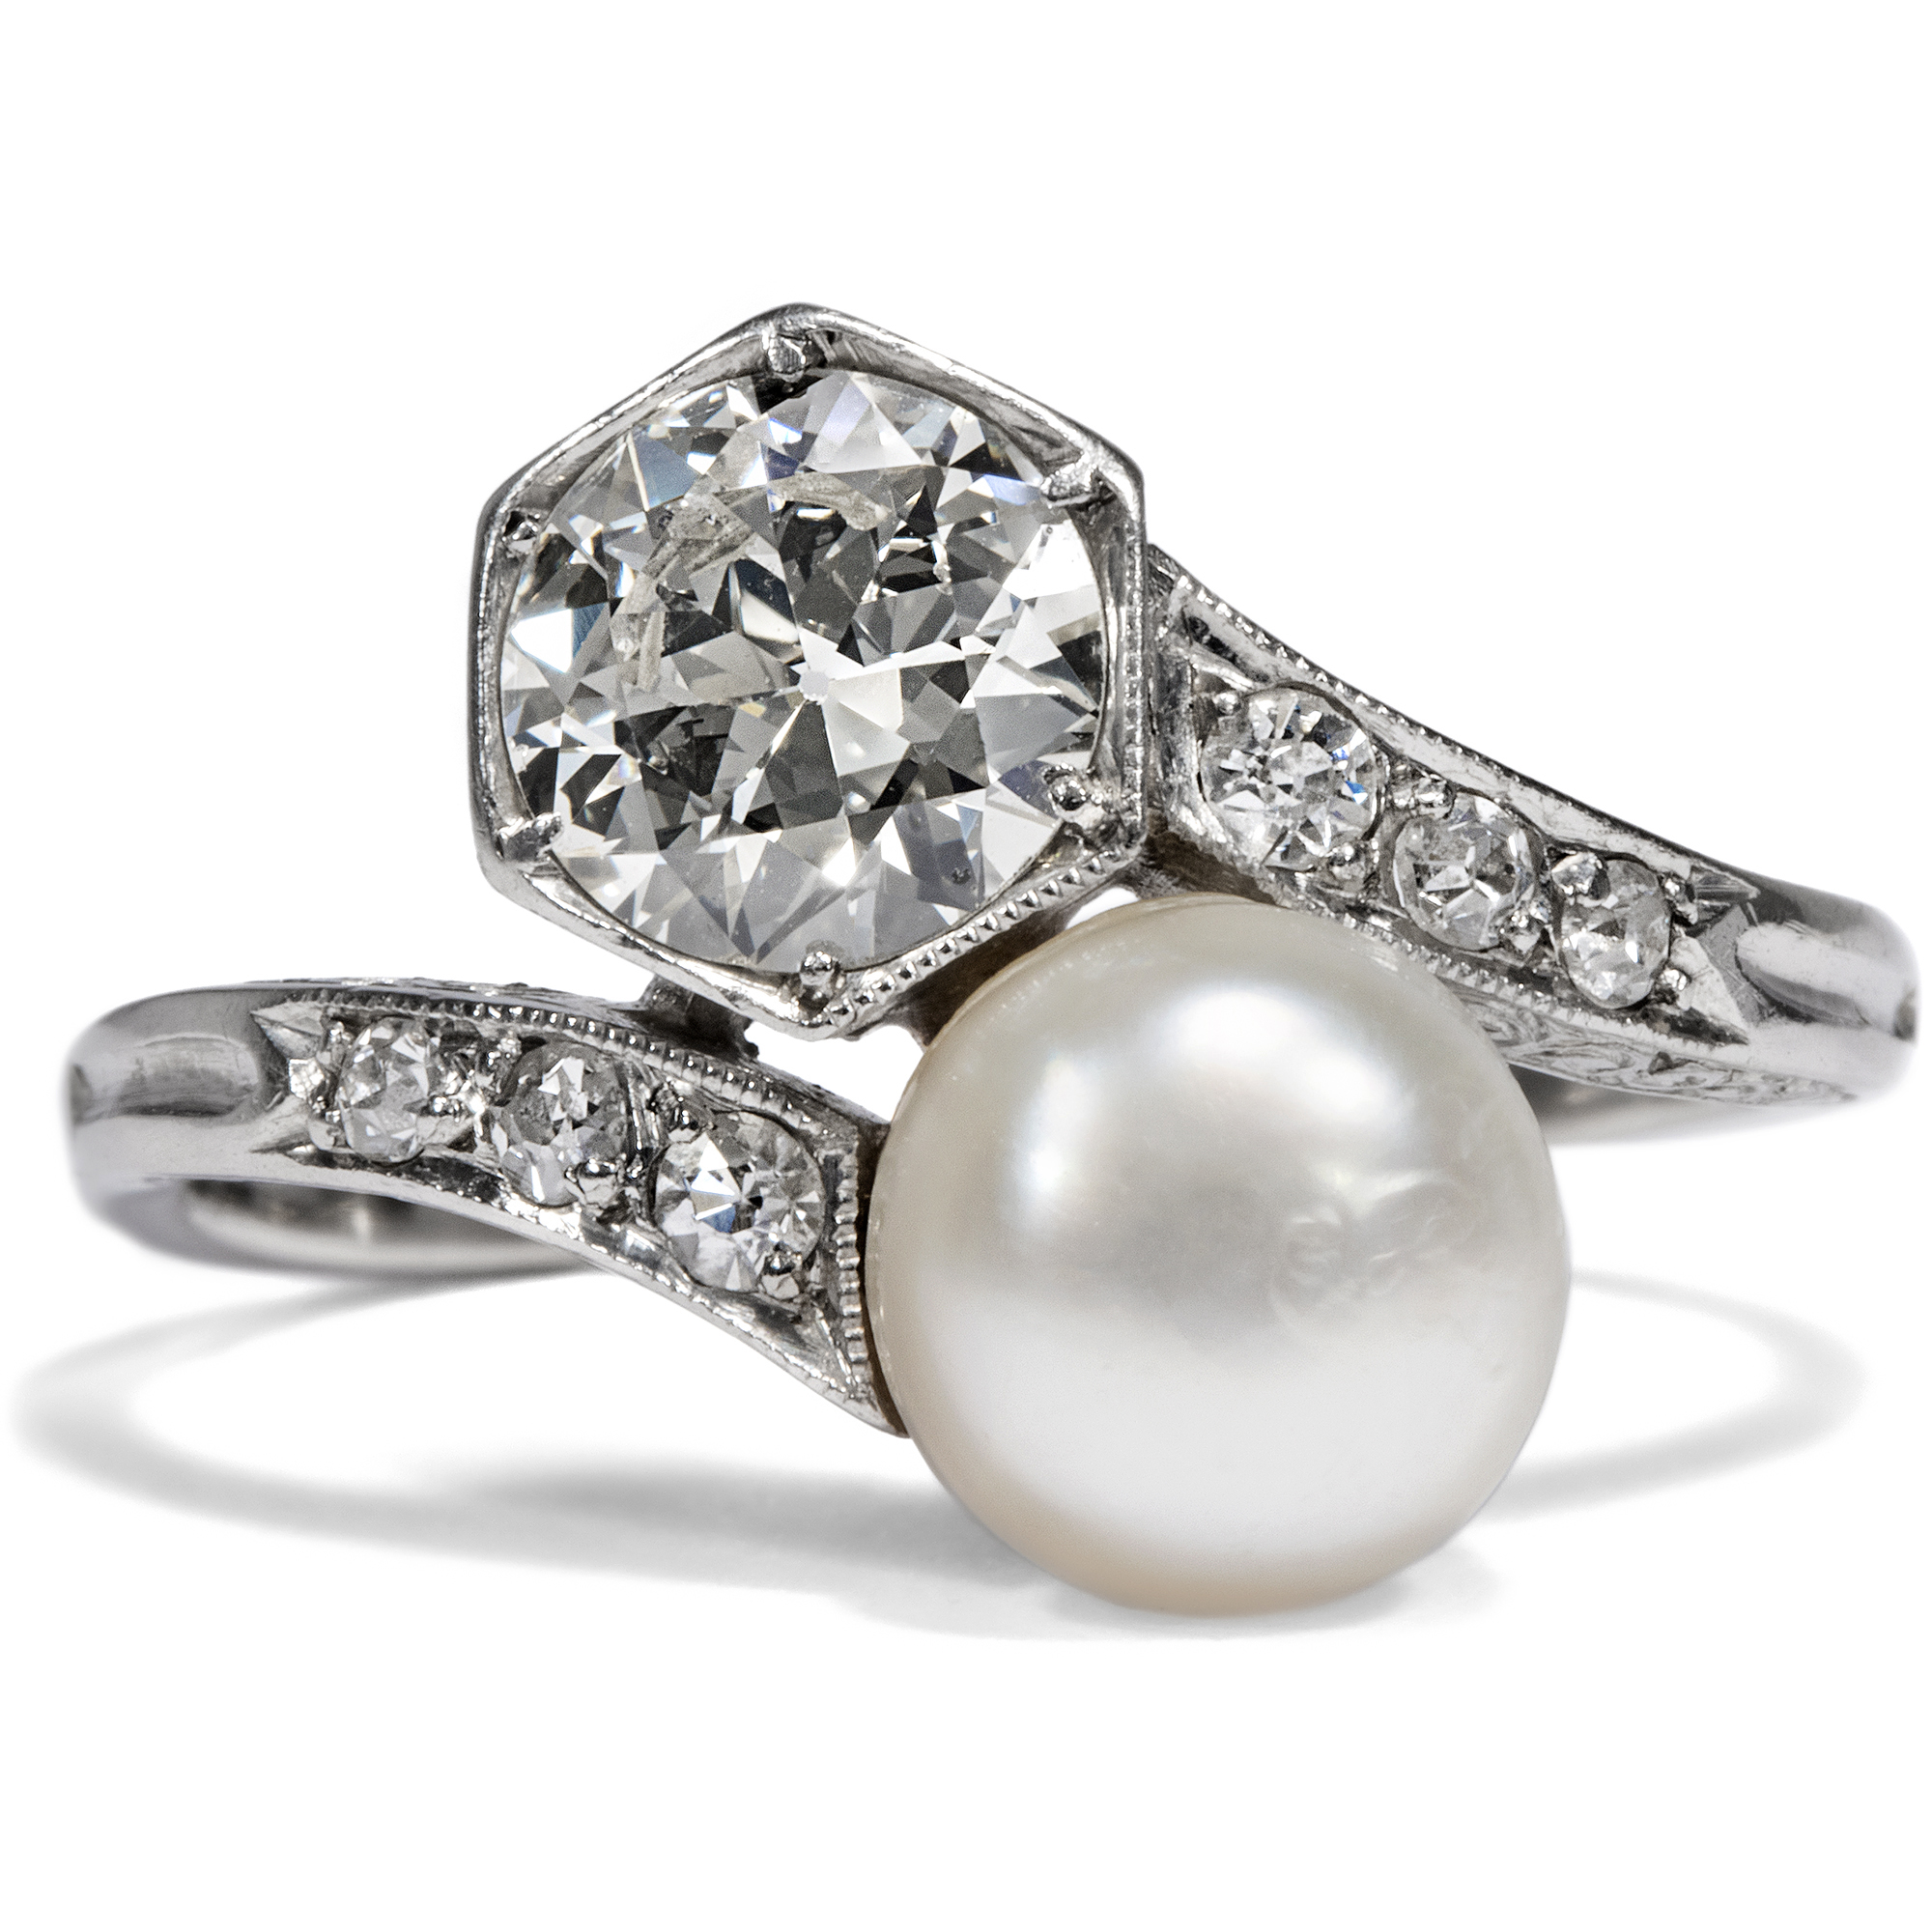 Fine Toi-et-moi Ring with Old Cut Diamond & Natural Pearl in Platinum, circa 1910